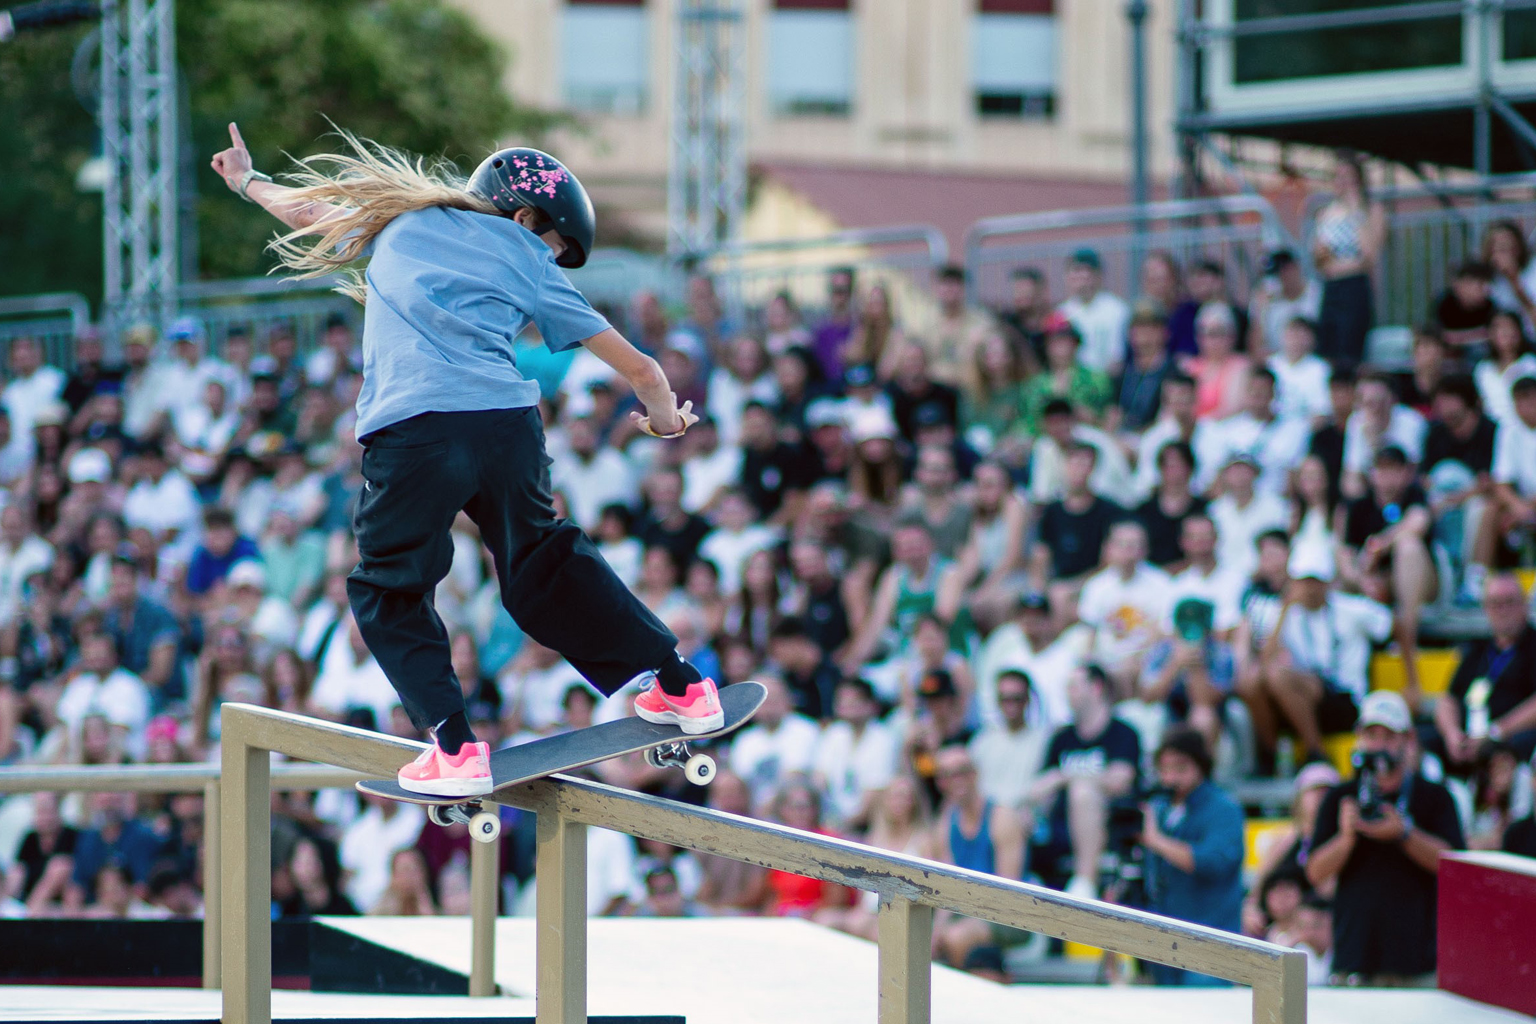 A girl slides down a rail on a skateboard in front of a large crowd